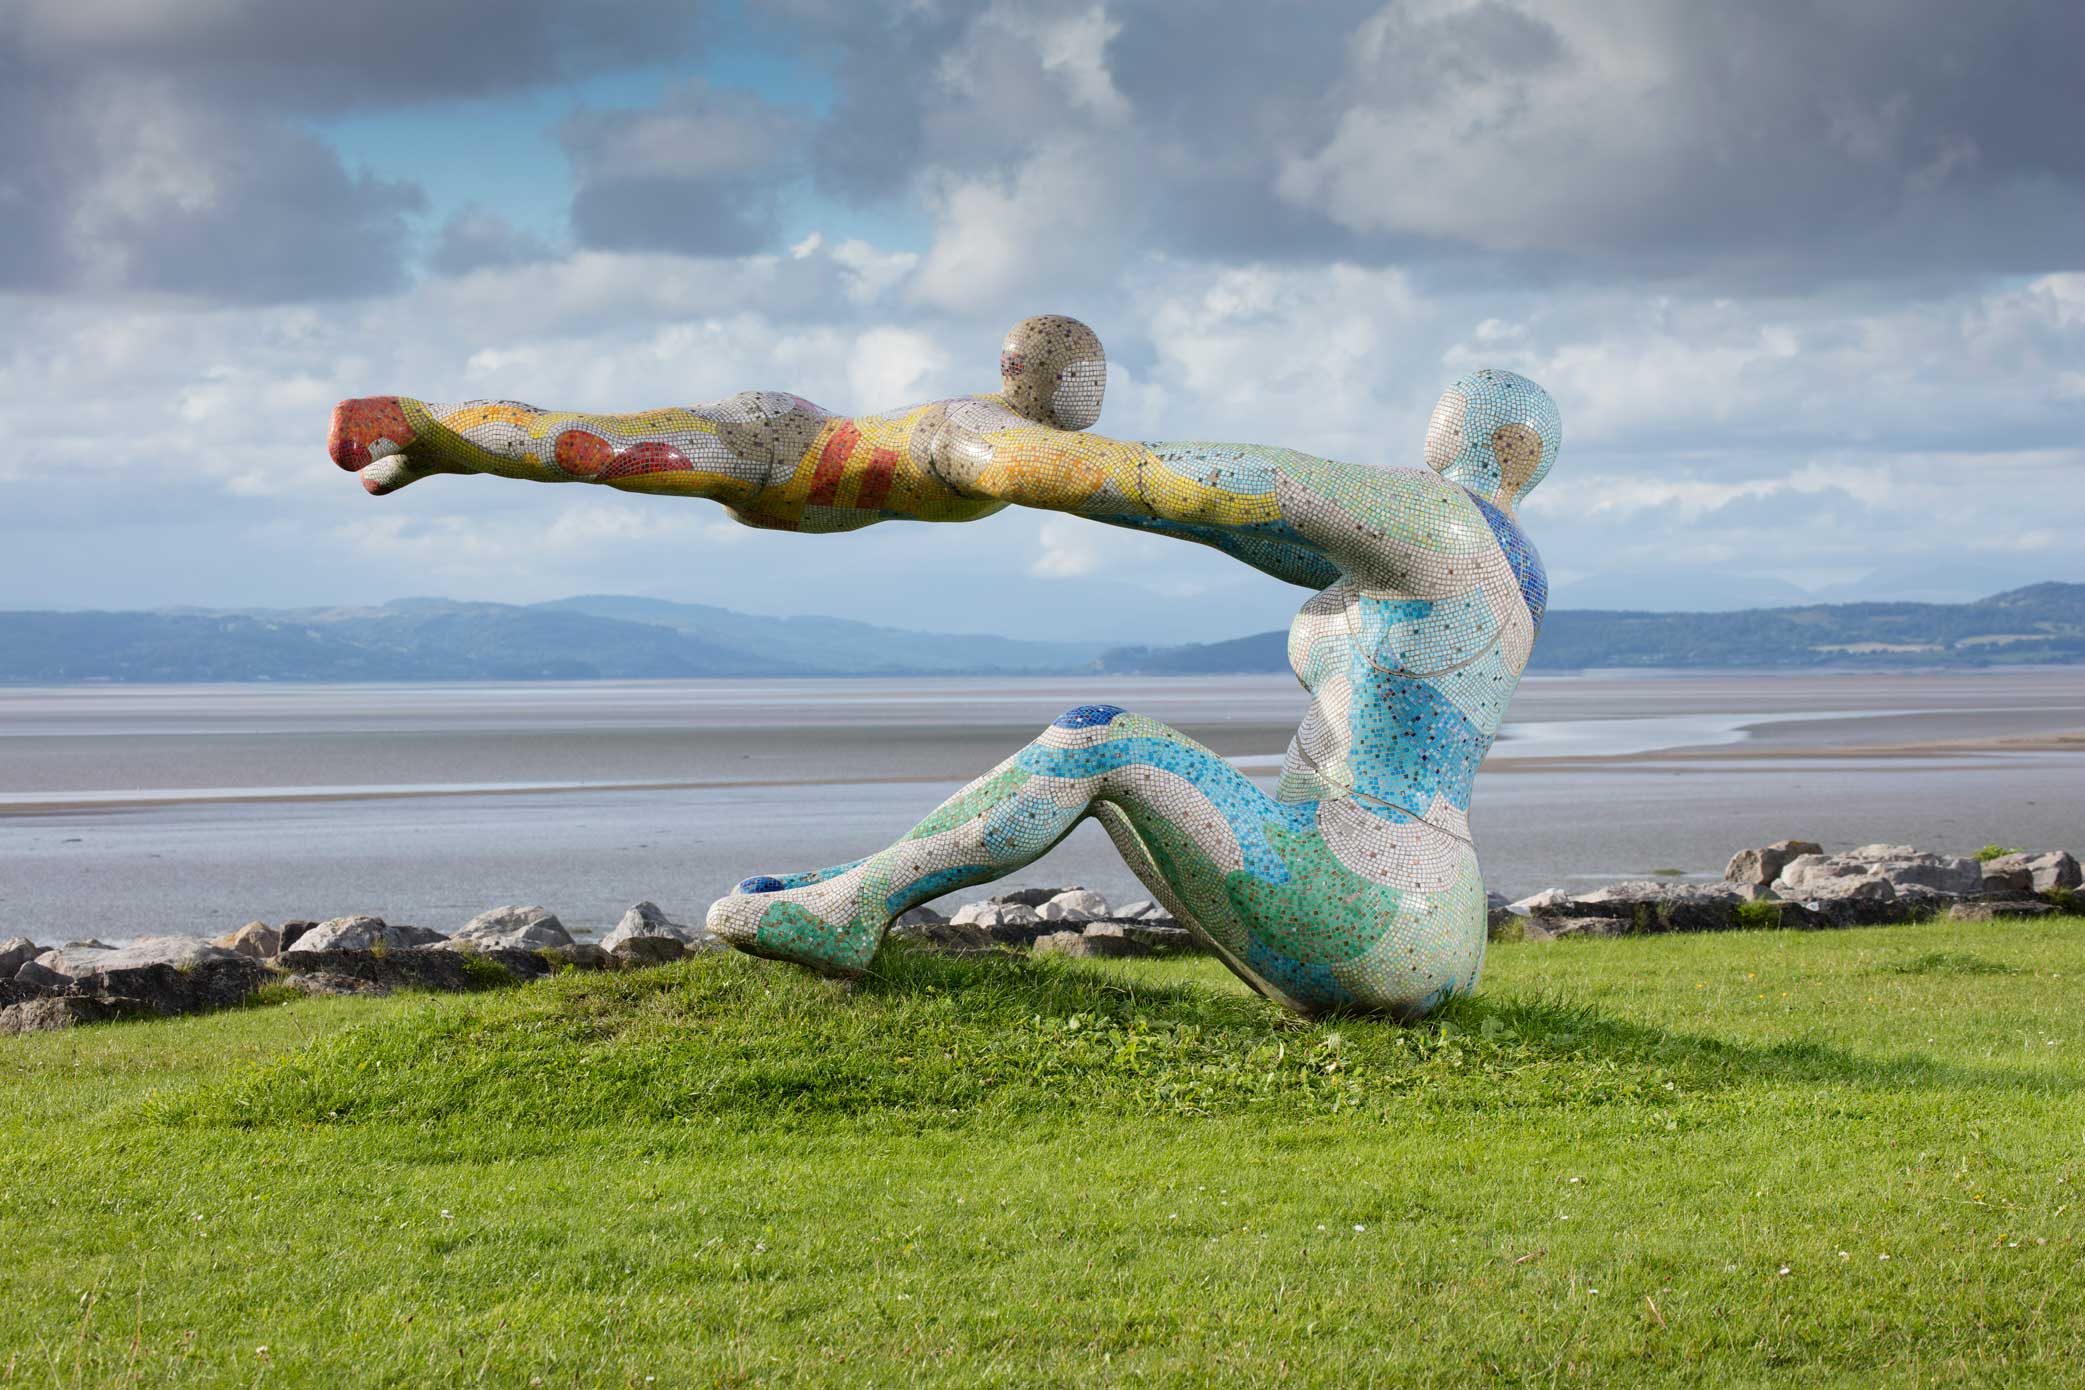 A sculptural installation in a coastal bay setting, depicting a seated female figure swinging a child in mid-air.